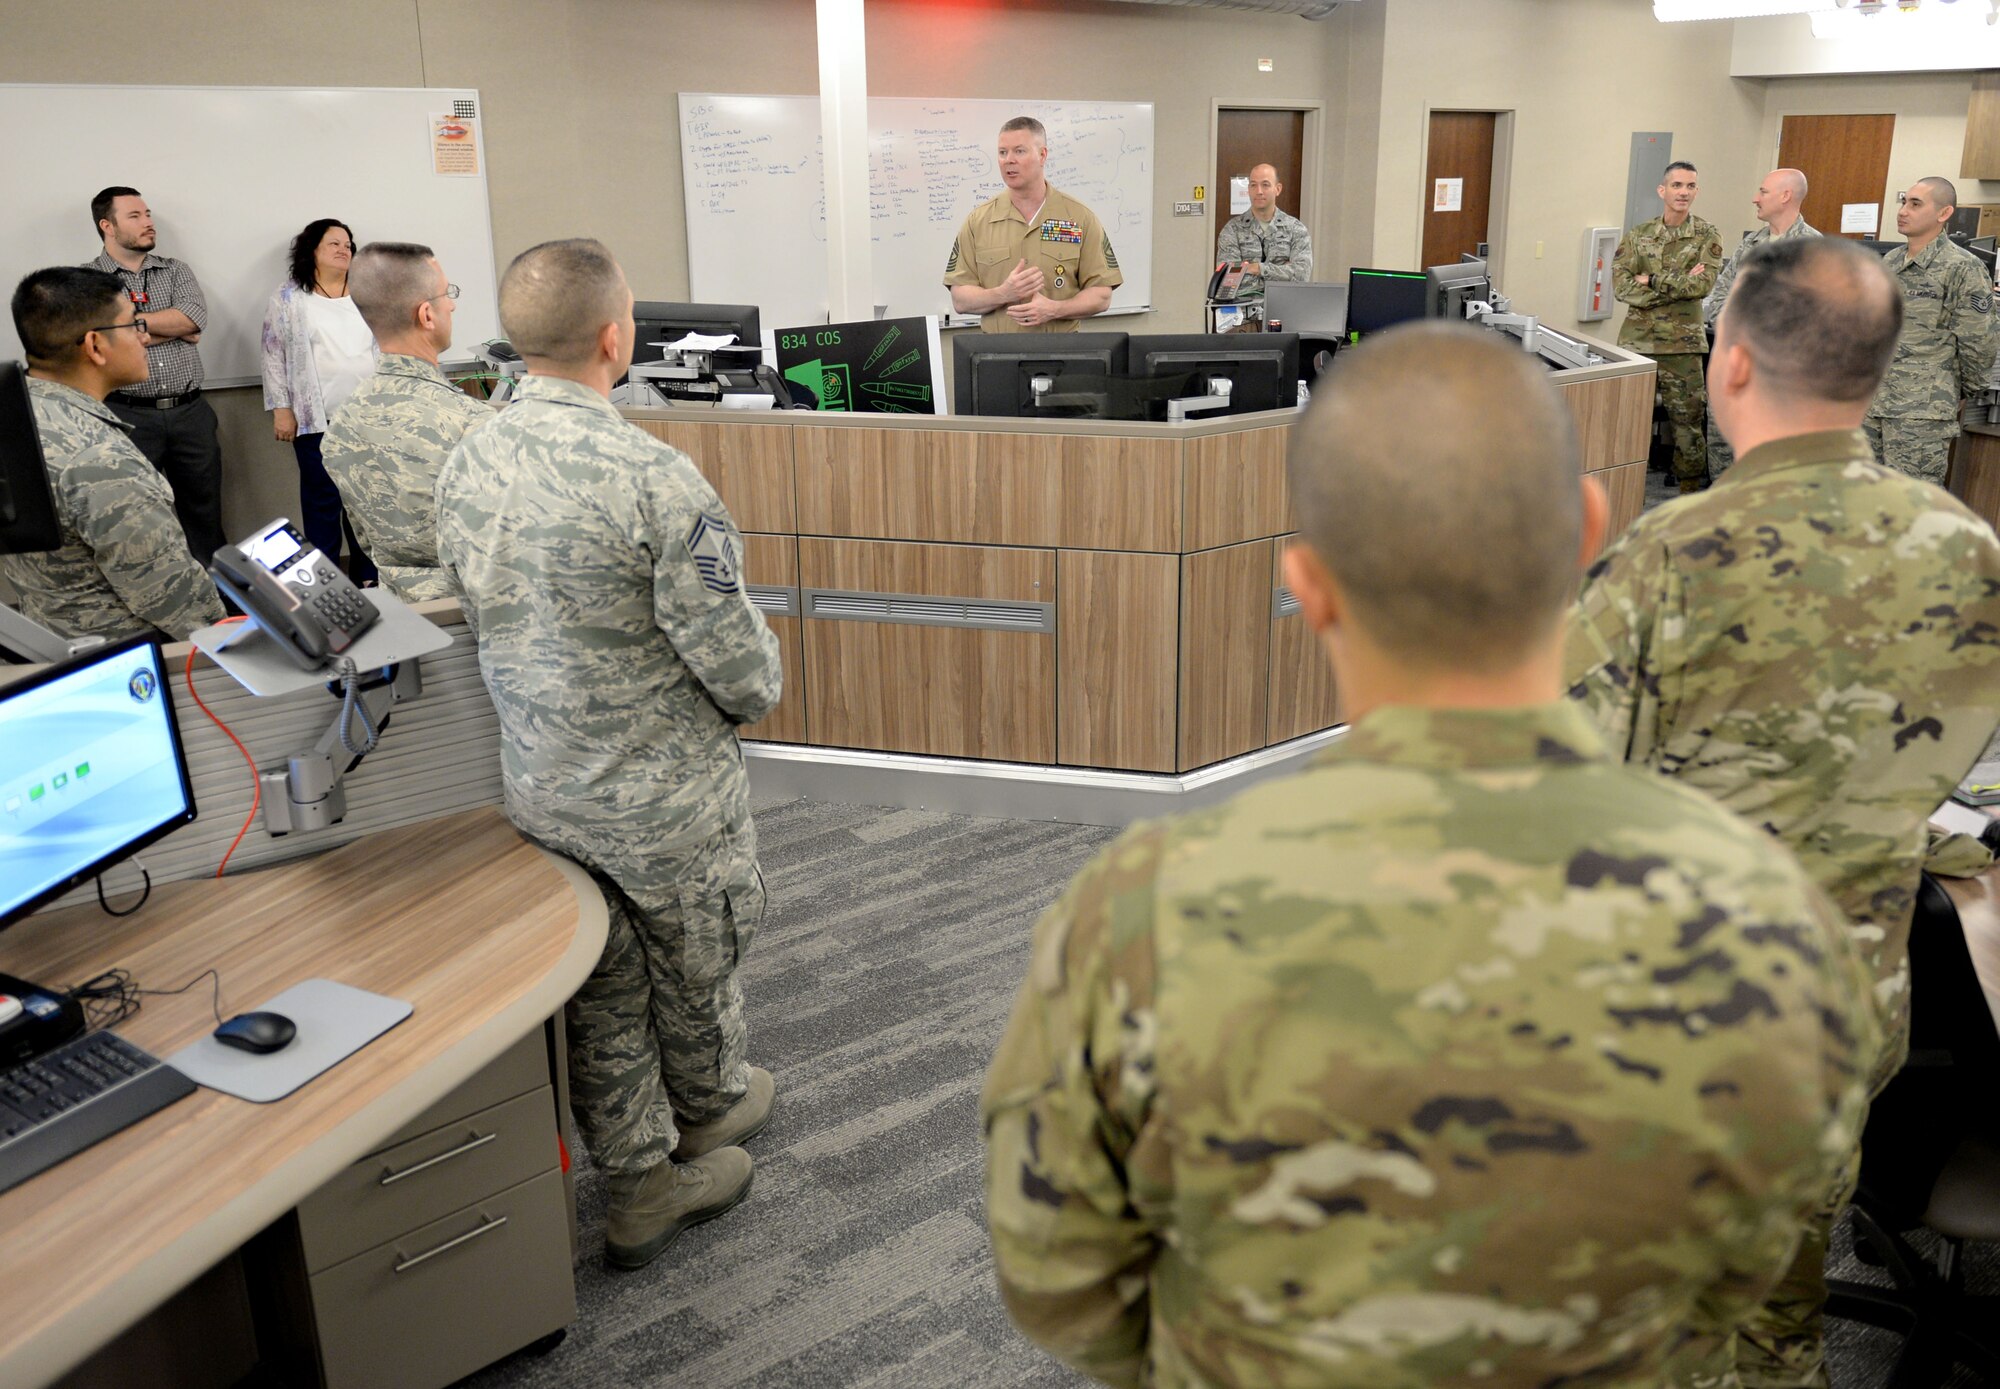 Master Gunnery Sgt. Scott Stalker, U.S. Cyber Command and National Security Agency command senior enlisted leader, greets members of the 834th Cyberspace Operations Squadron at Joint Base San Antonio-Lackland, Texas, March 21, 2019. During his visit, Stalker met with cyber Airmen to learn more about their unit’s missions. (U.S. Air Force photo by Tech. Sgt. R.J. Biermann)